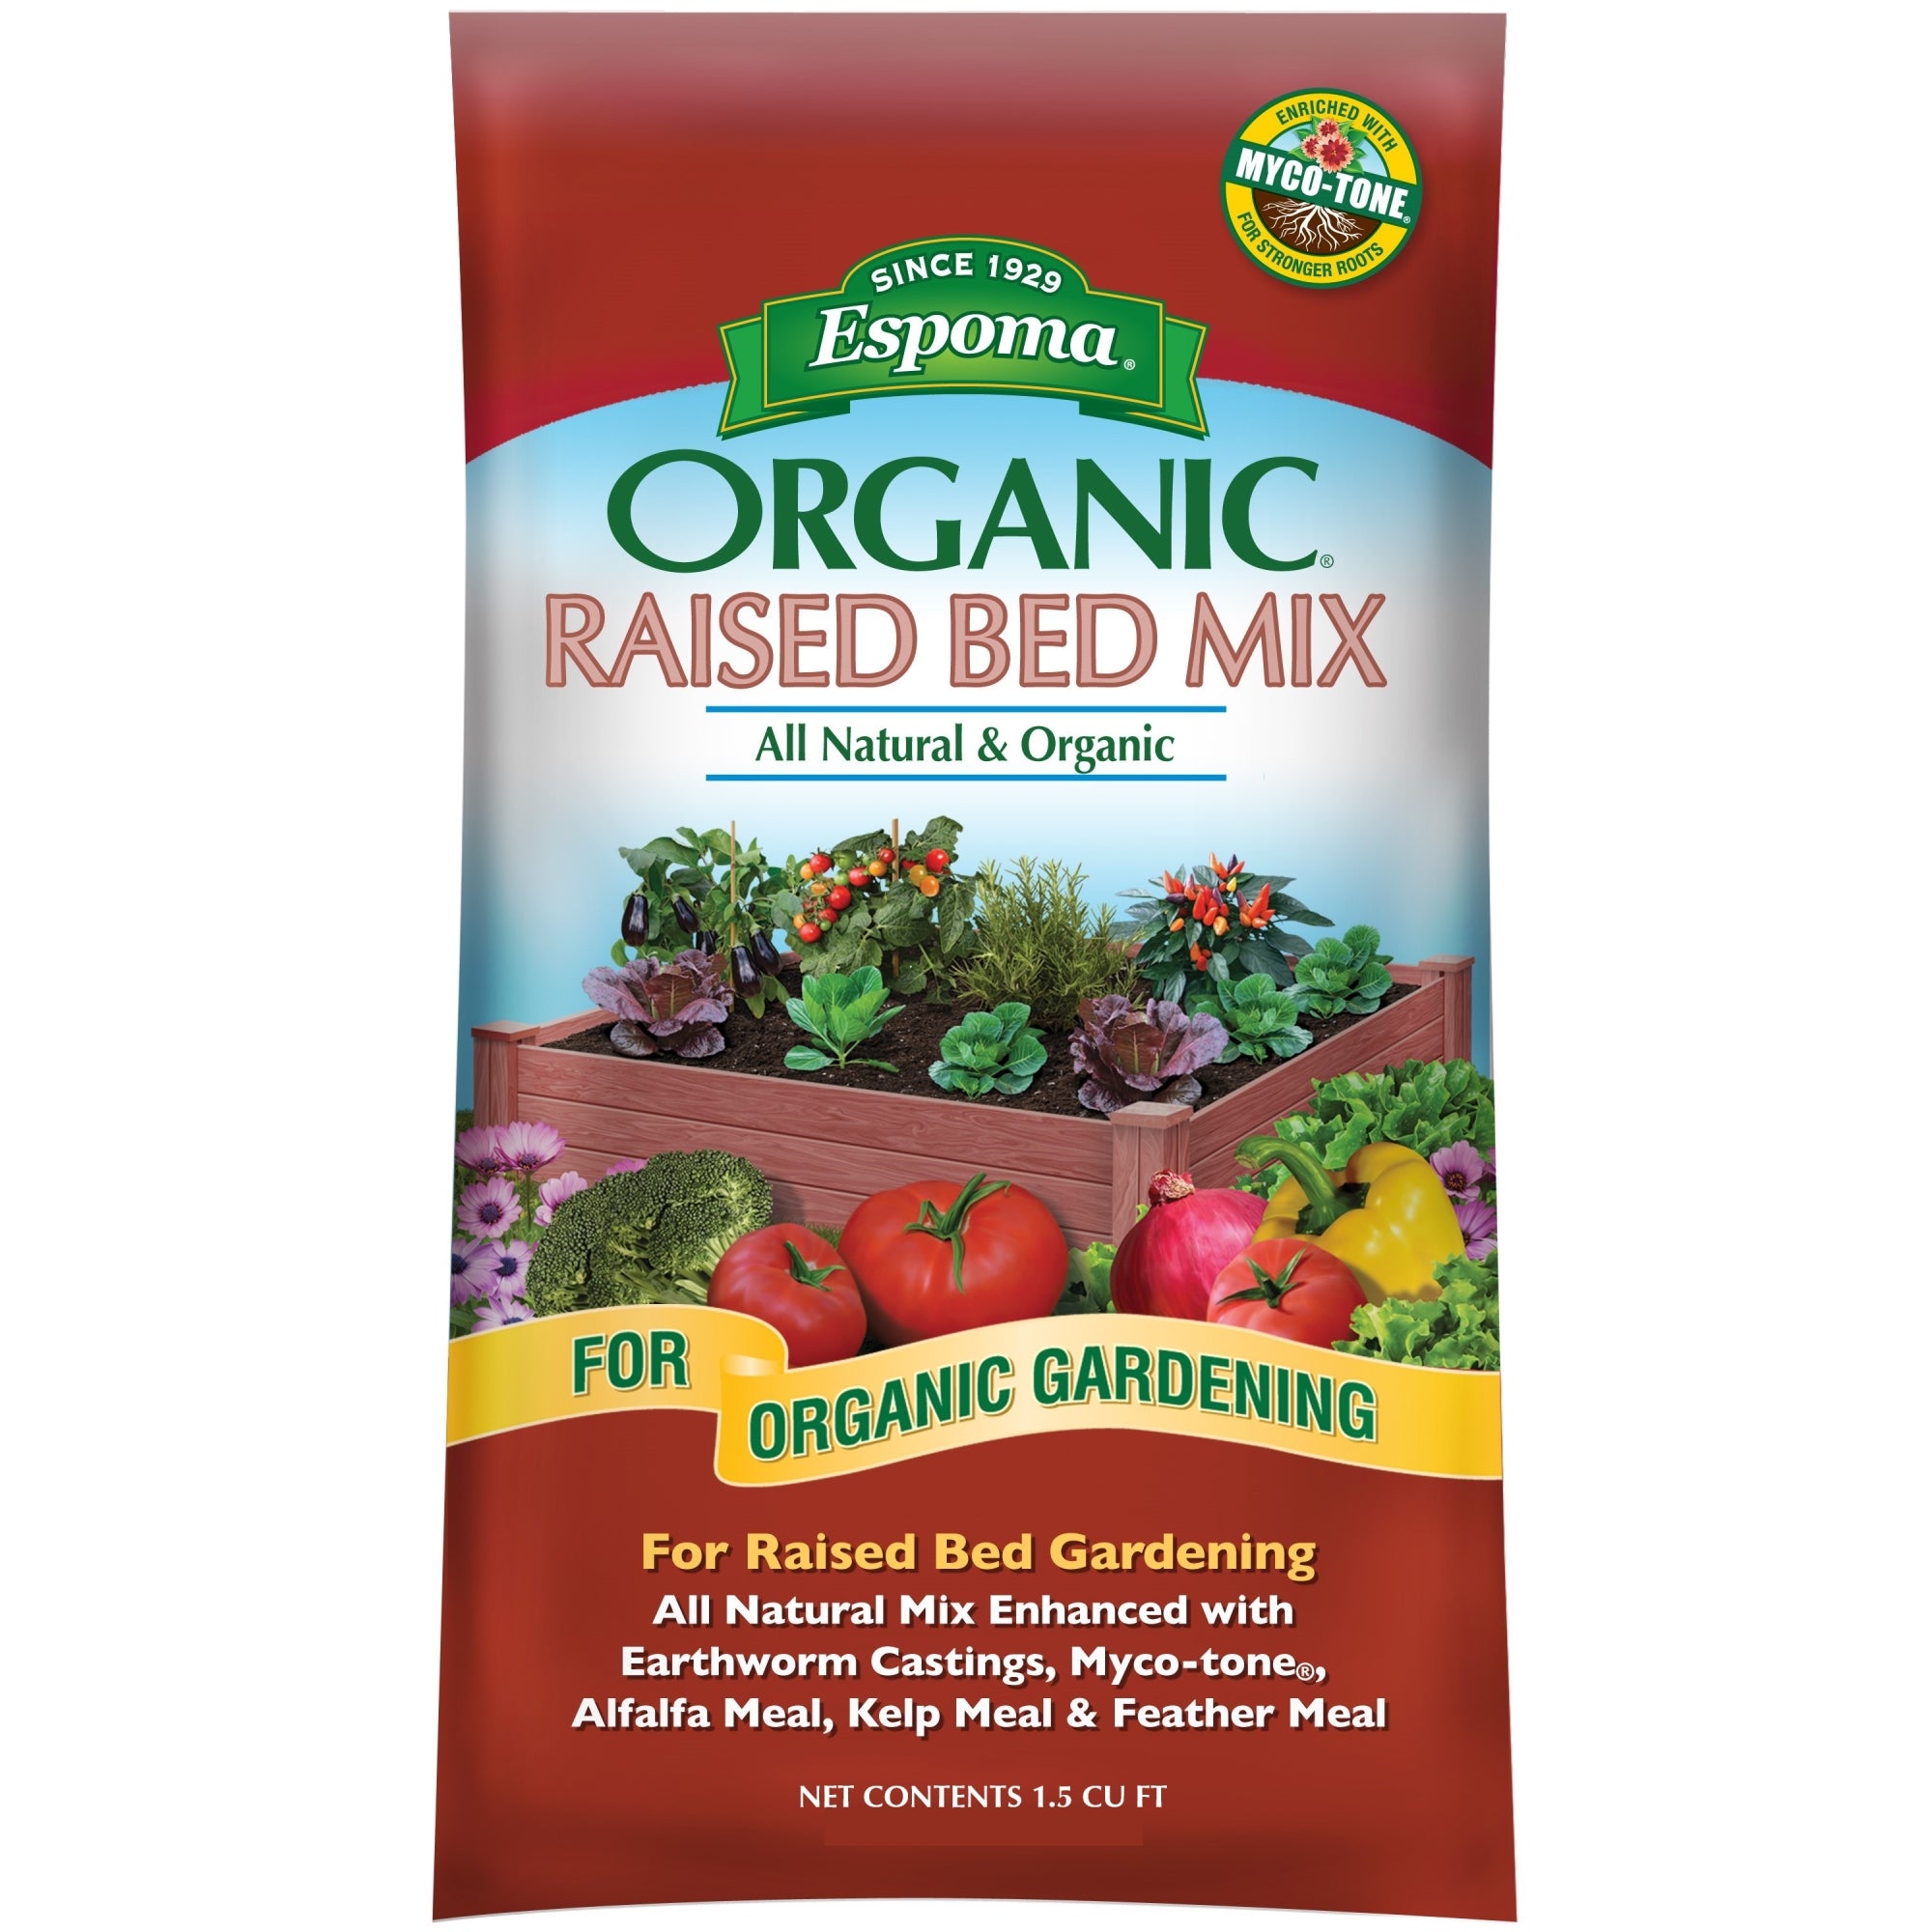 Espoma Organic Raised Bed Mix, All Natural and Organic Potting Soil Mix for Raised Garden Beds, for Organic Gardening, 1.5 CF Bag